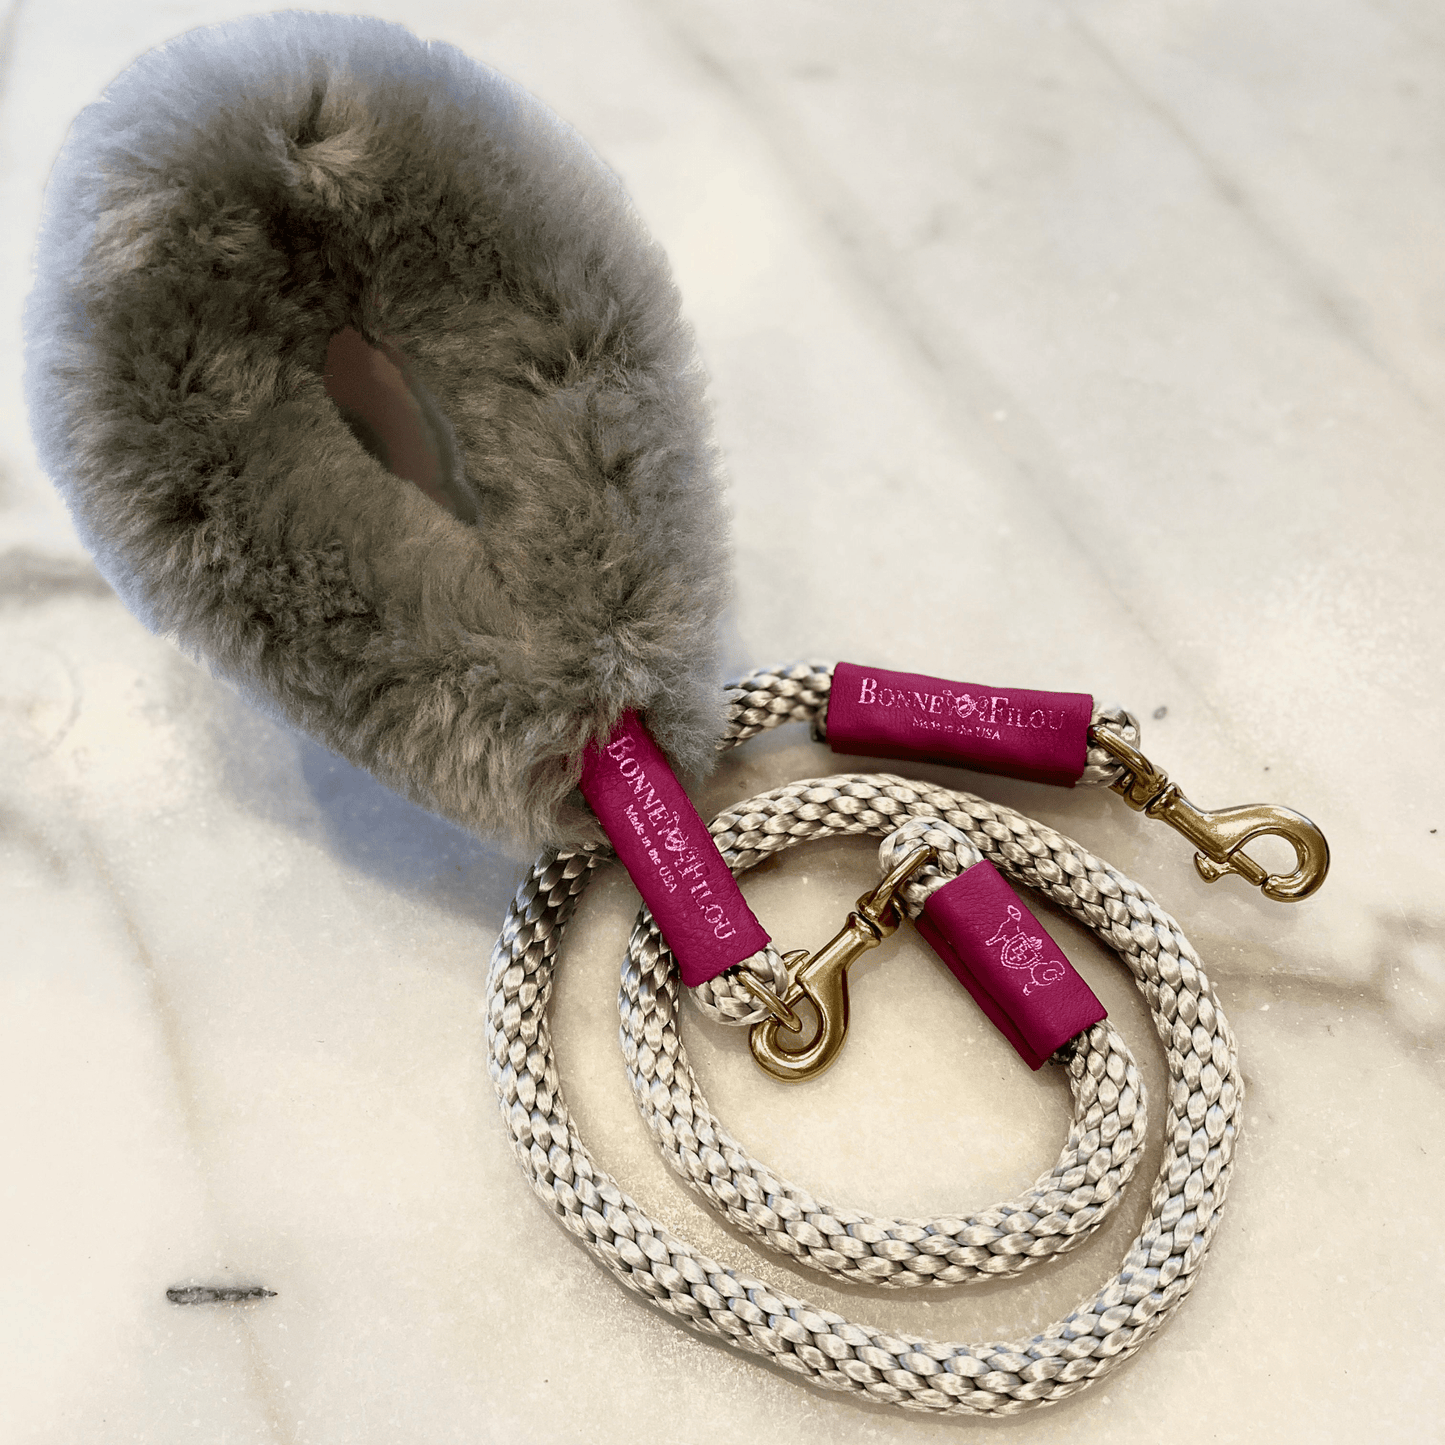 Dog and Pet Stuff Gray Grip + Gray Leash Bundle Shearling Fur Grip + Rope Leash for Dogs